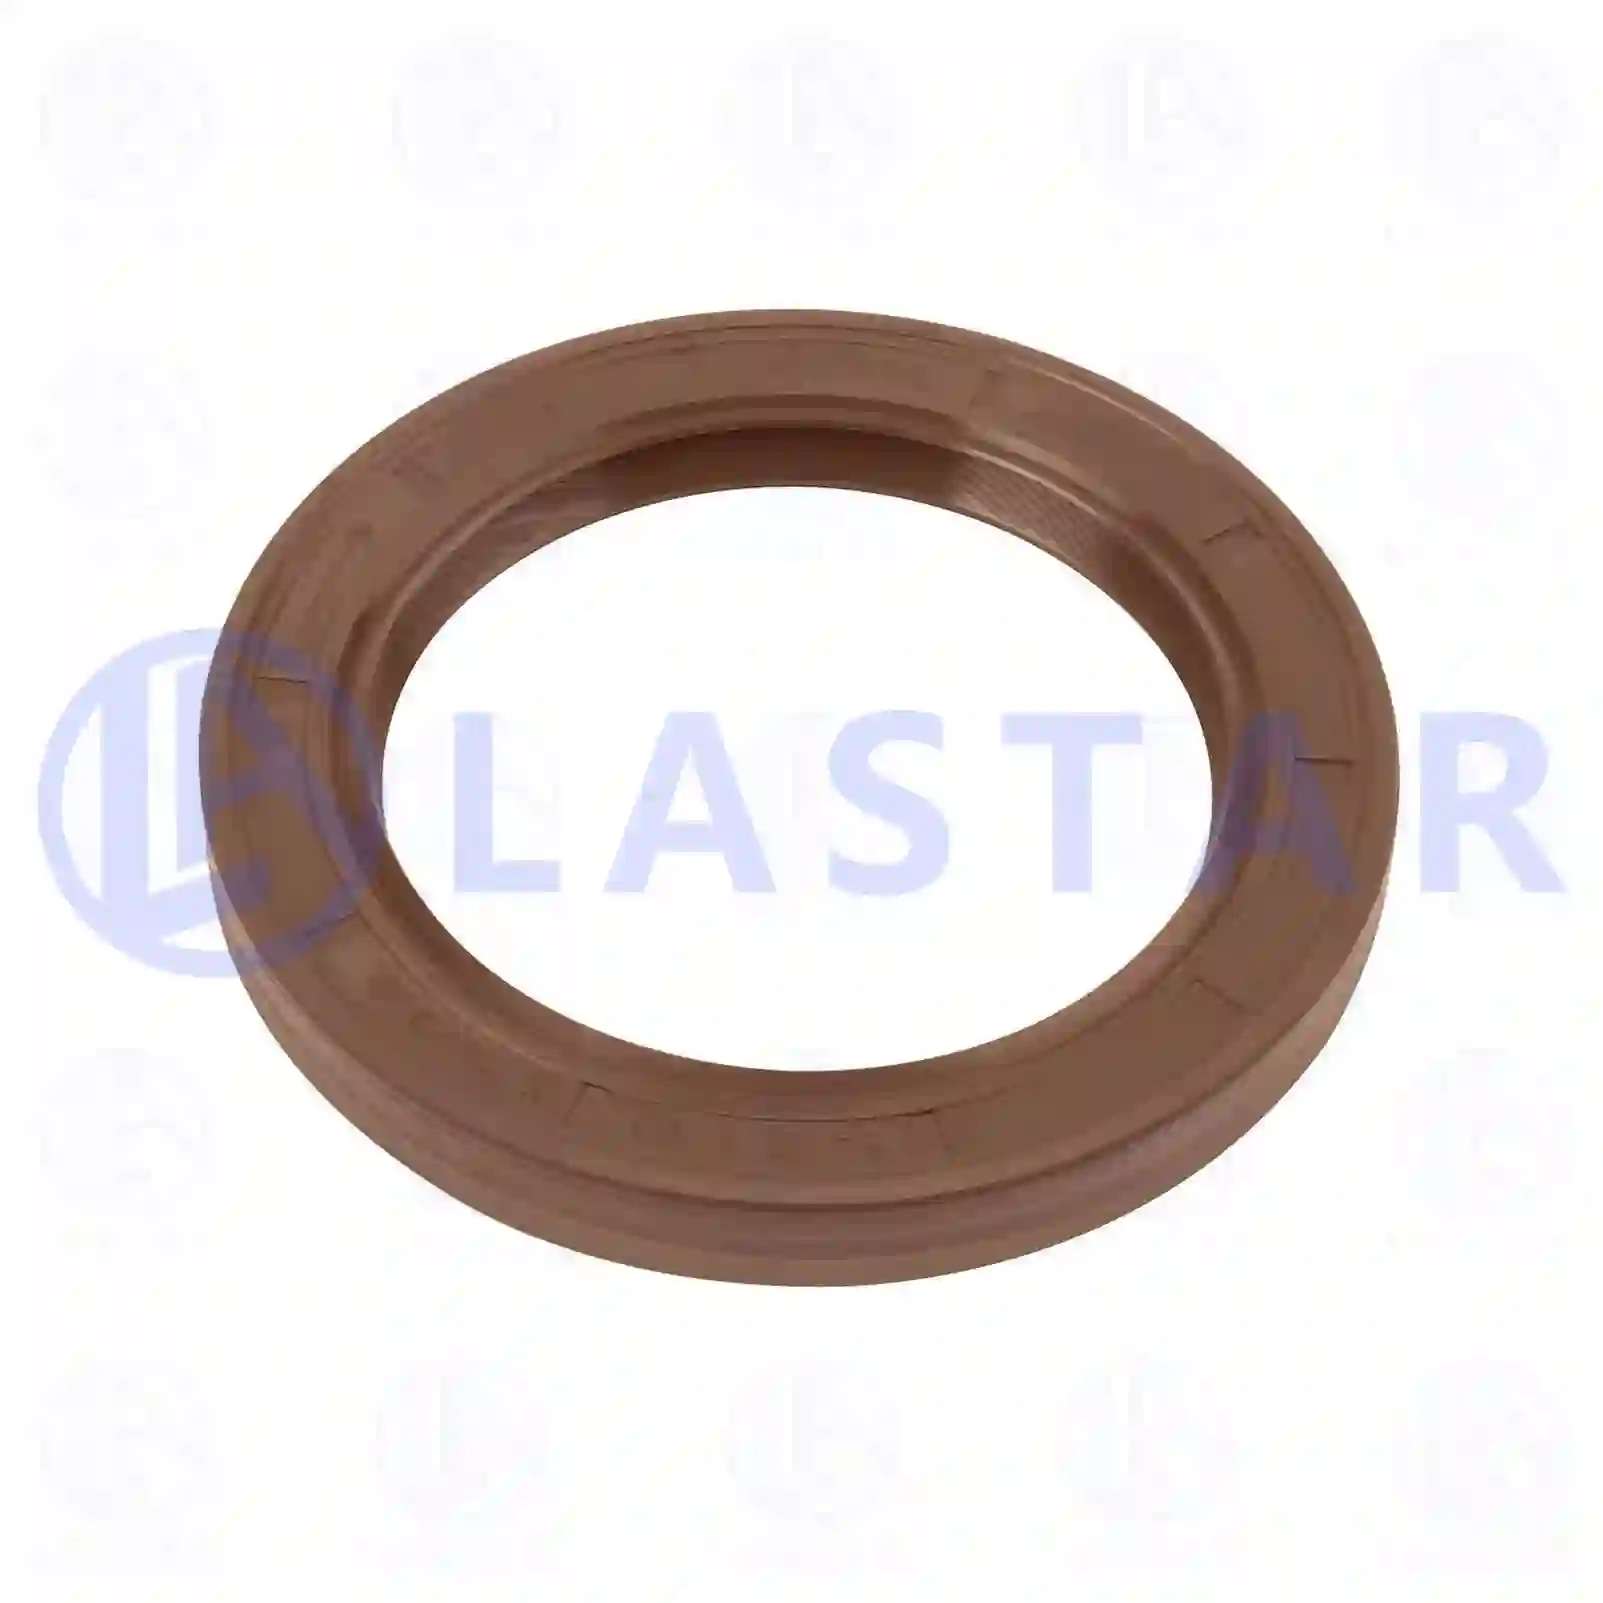 Oil seal, 77732130, 267268, 943703, , ||  77732130 Lastar Spare Part | Truck Spare Parts, Auotomotive Spare Parts Oil seal, 77732130, 267268, 943703, , ||  77732130 Lastar Spare Part | Truck Spare Parts, Auotomotive Spare Parts